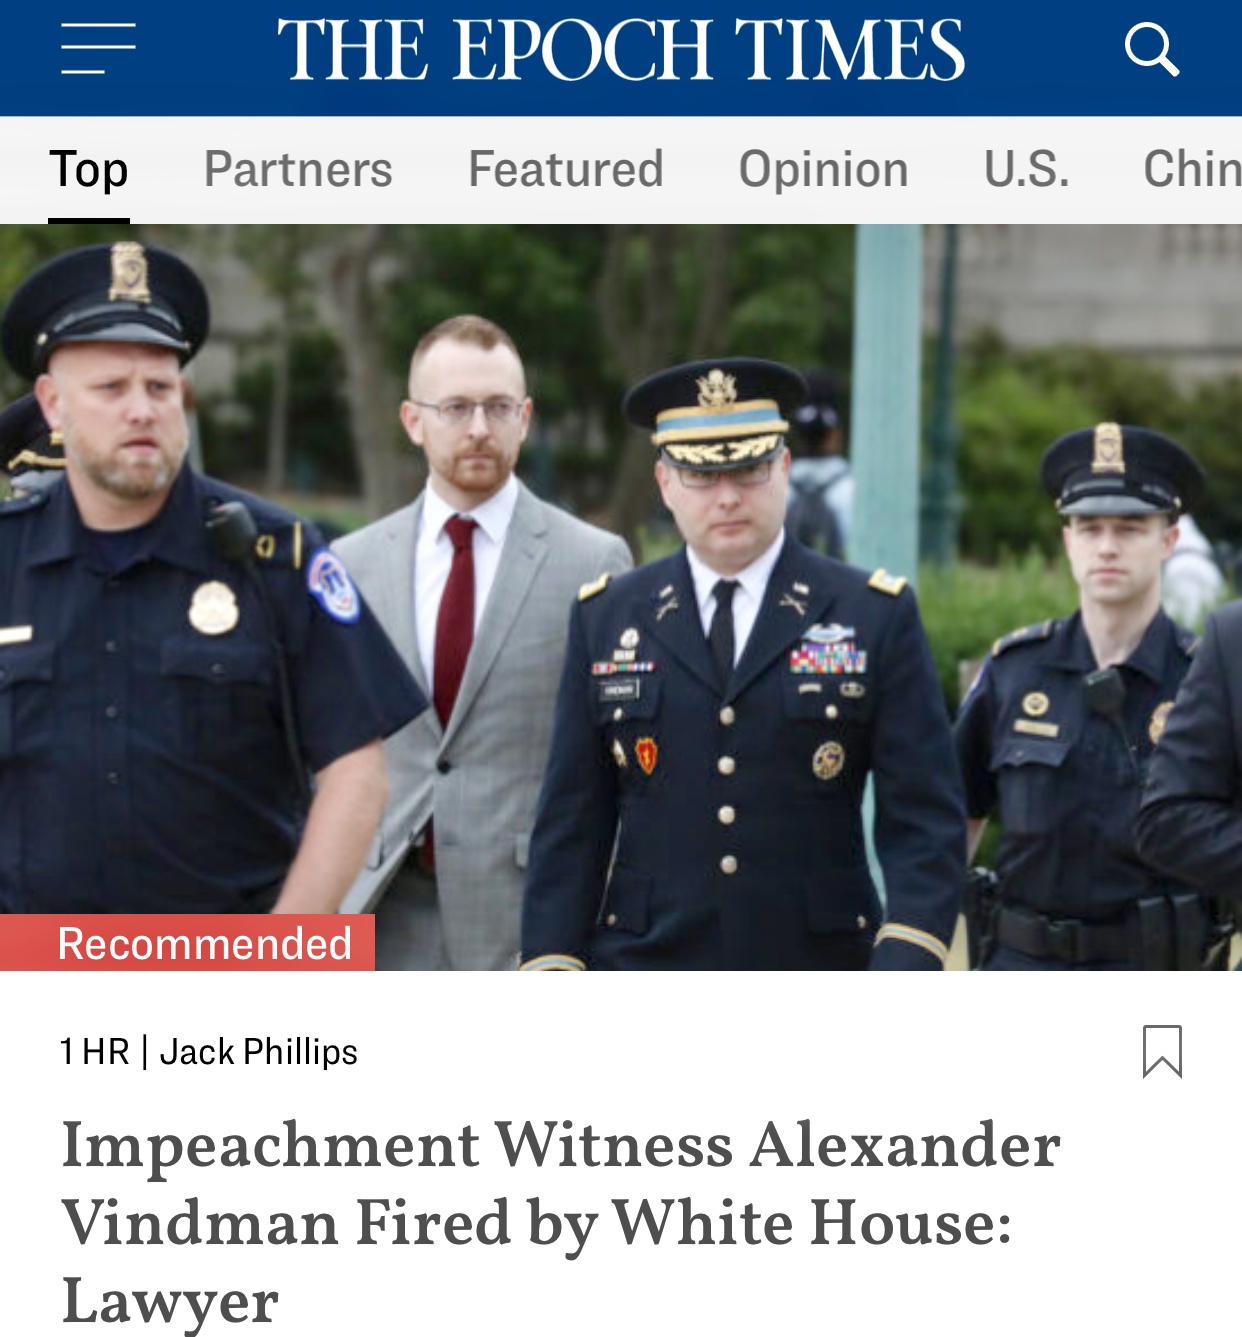 Impeachment Witness Alexander Vindman Fired by White House Lawyer